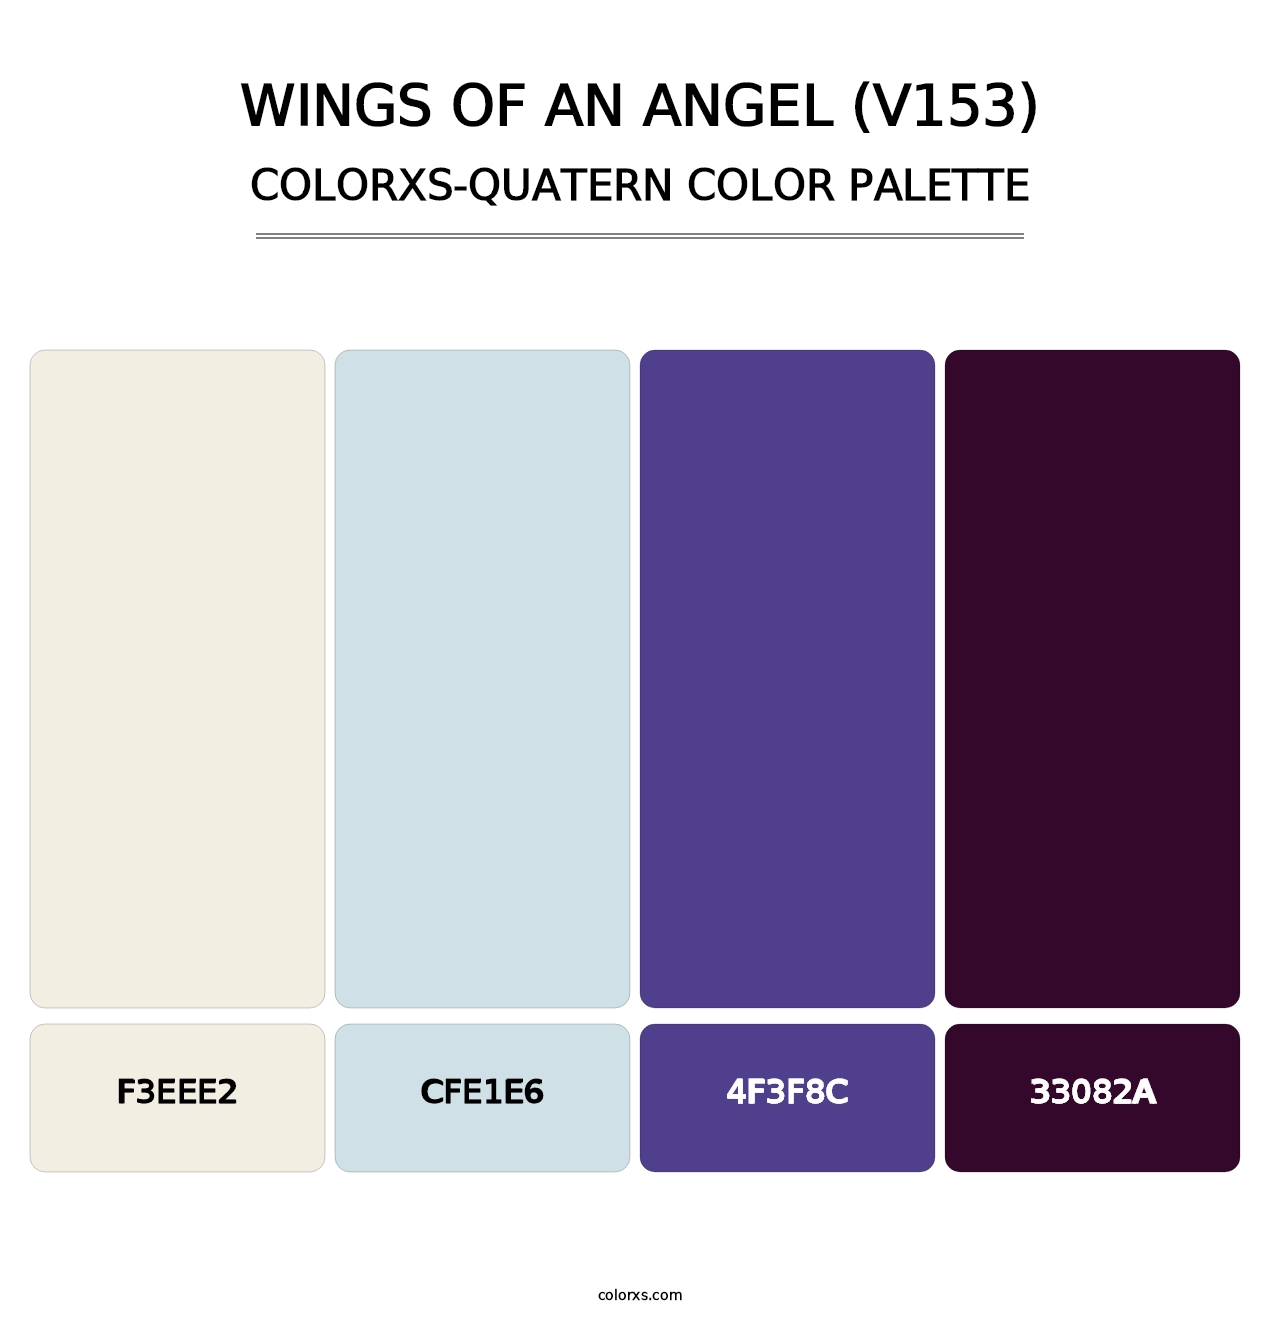 Wings of an Angel (V153) - Colorxs Quatern Palette